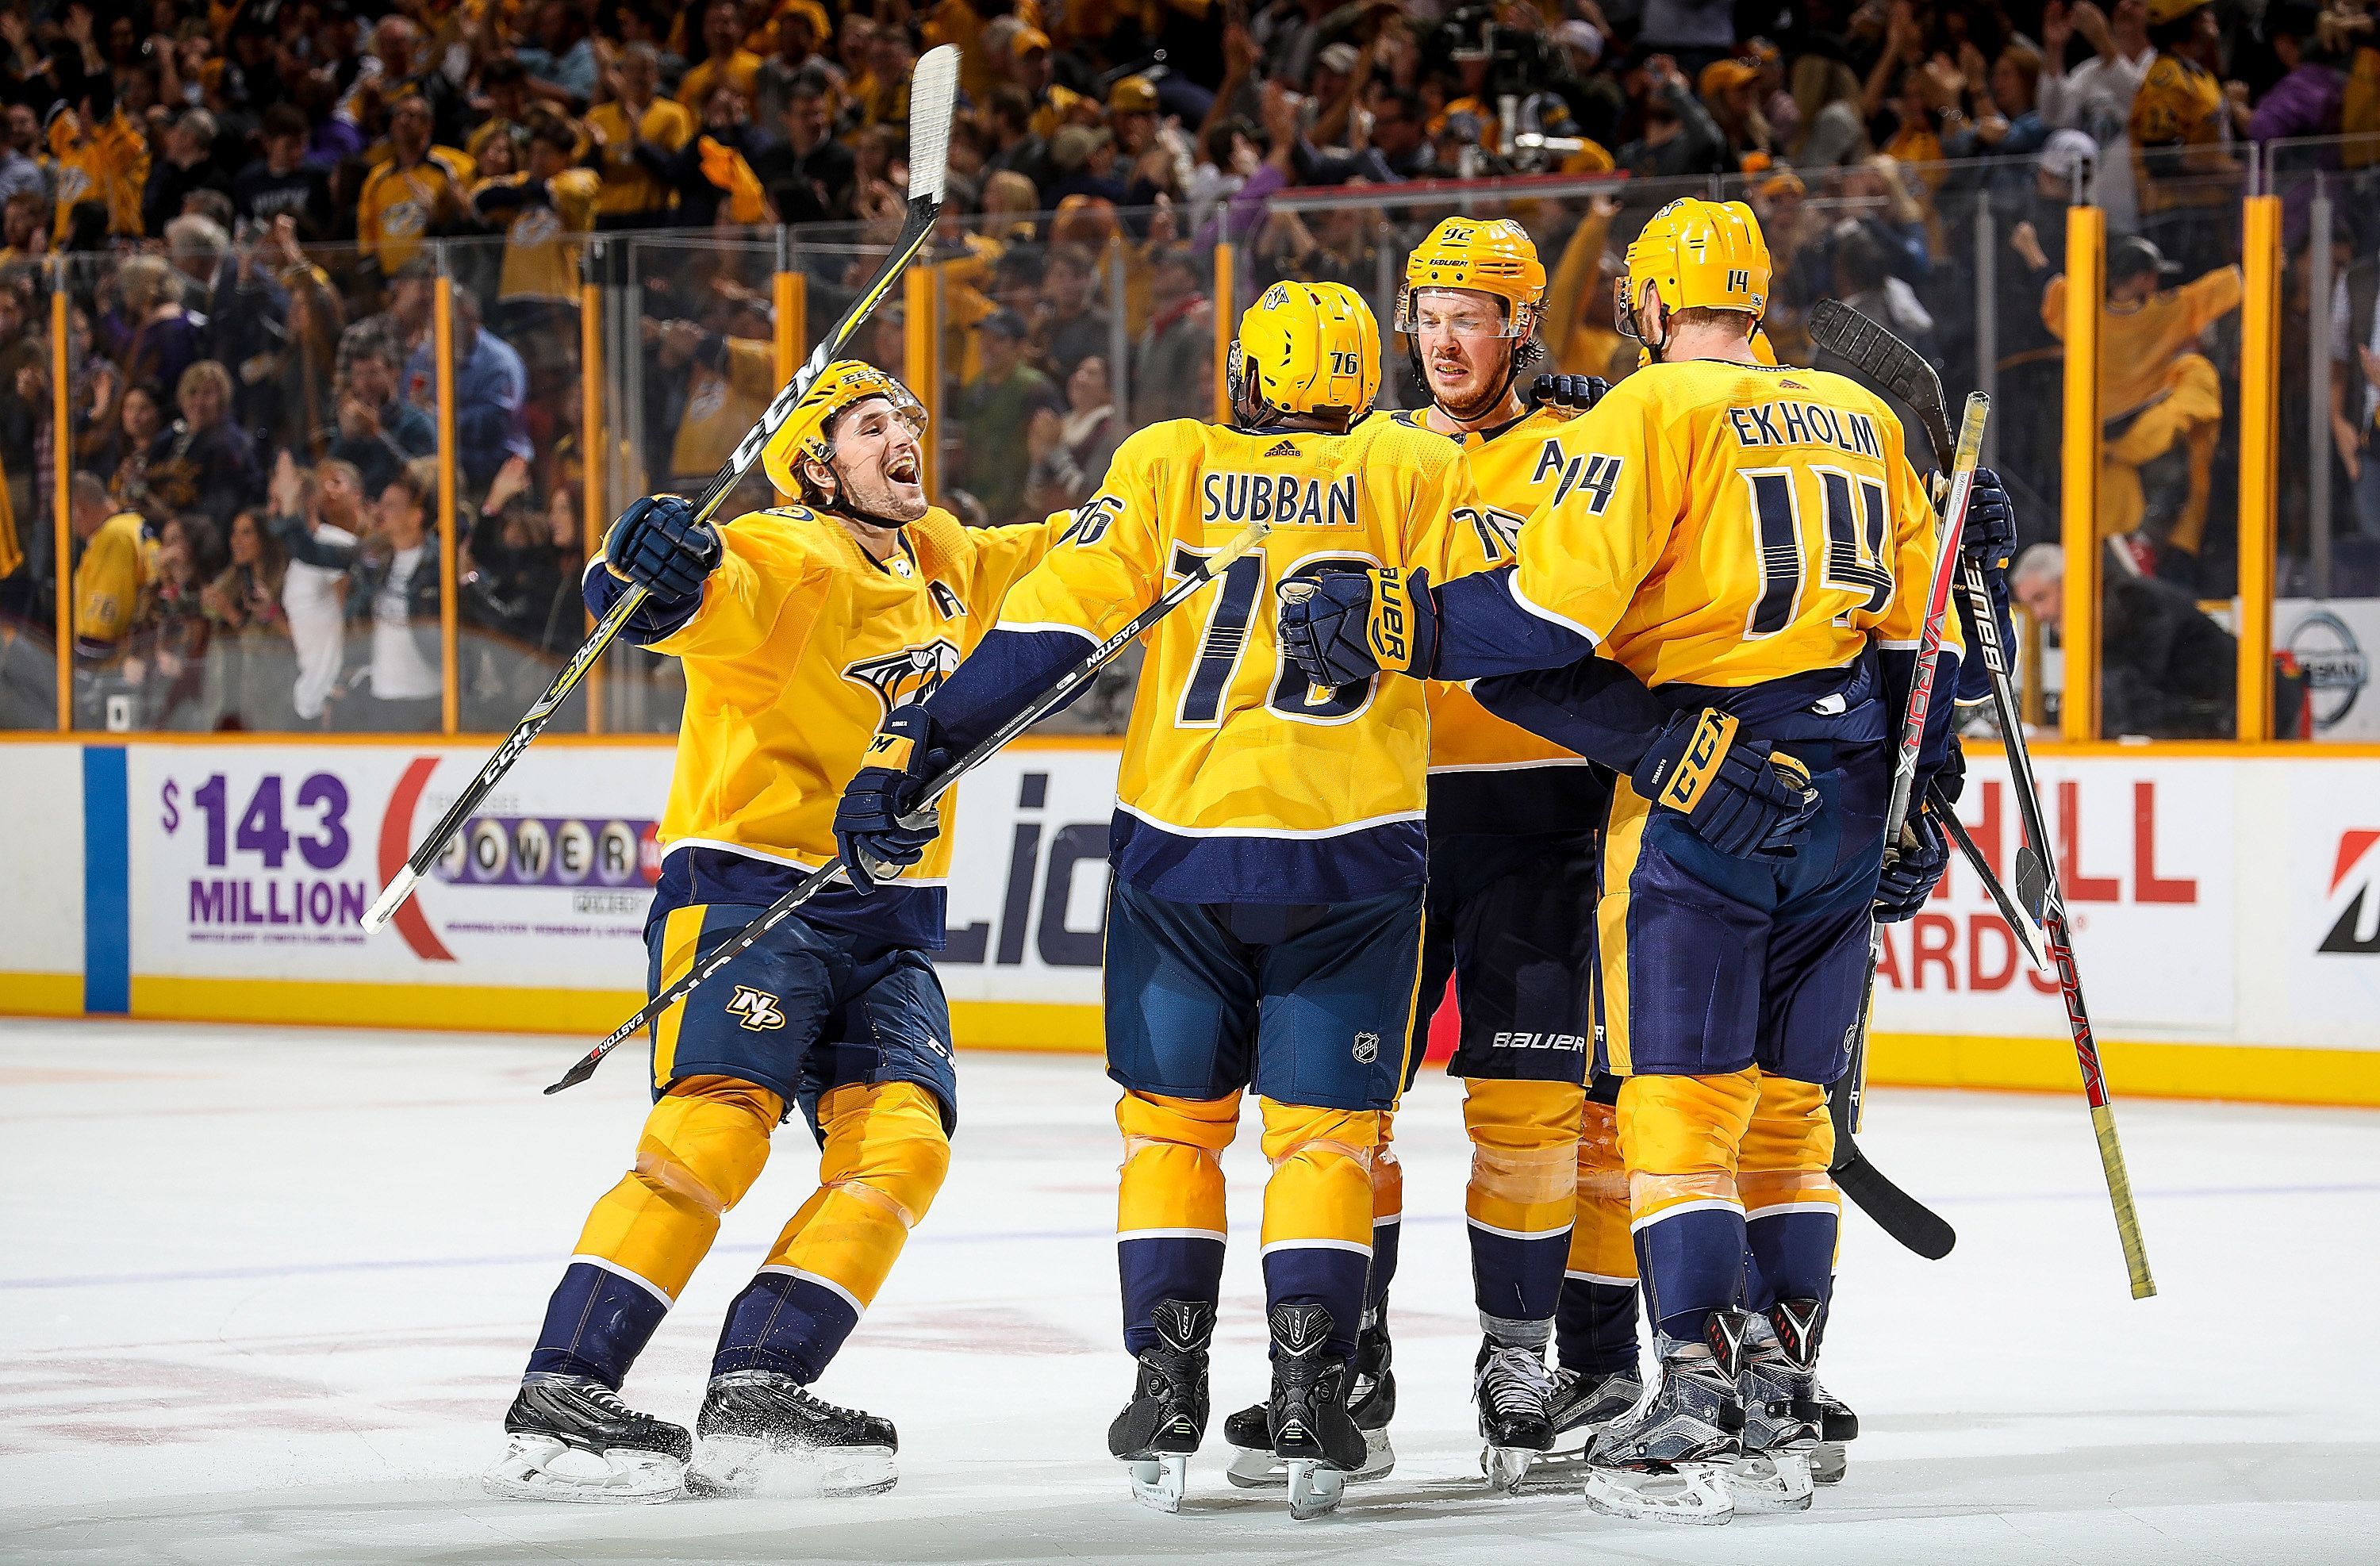 Nashville Predators: If the team wants to win, four players must